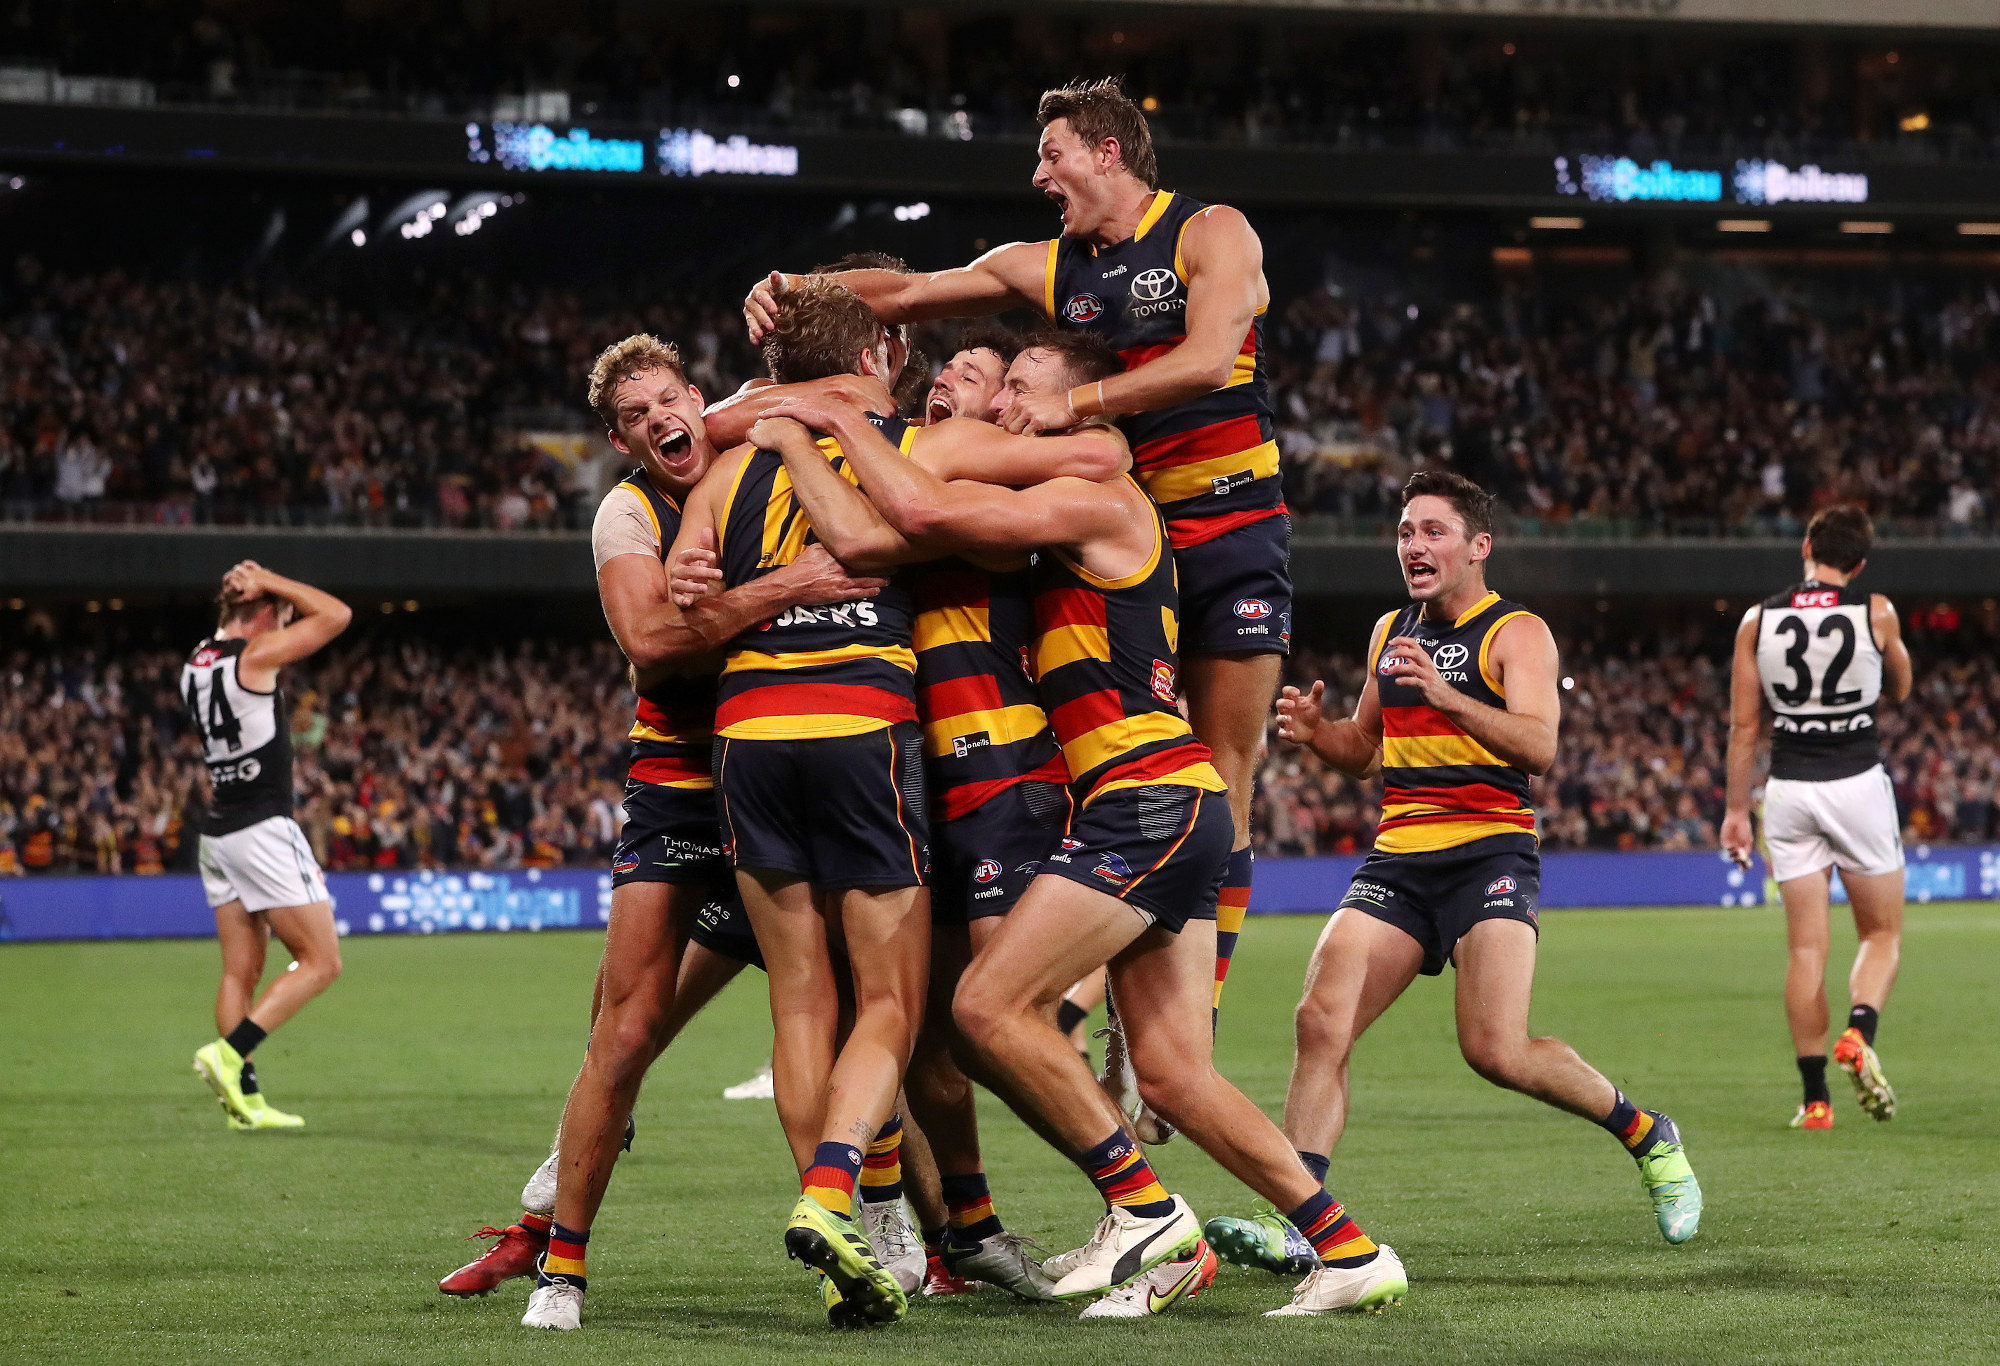 Players surround Jordan Dawson of the Crows after kicking the winning goal during Showdown 51.